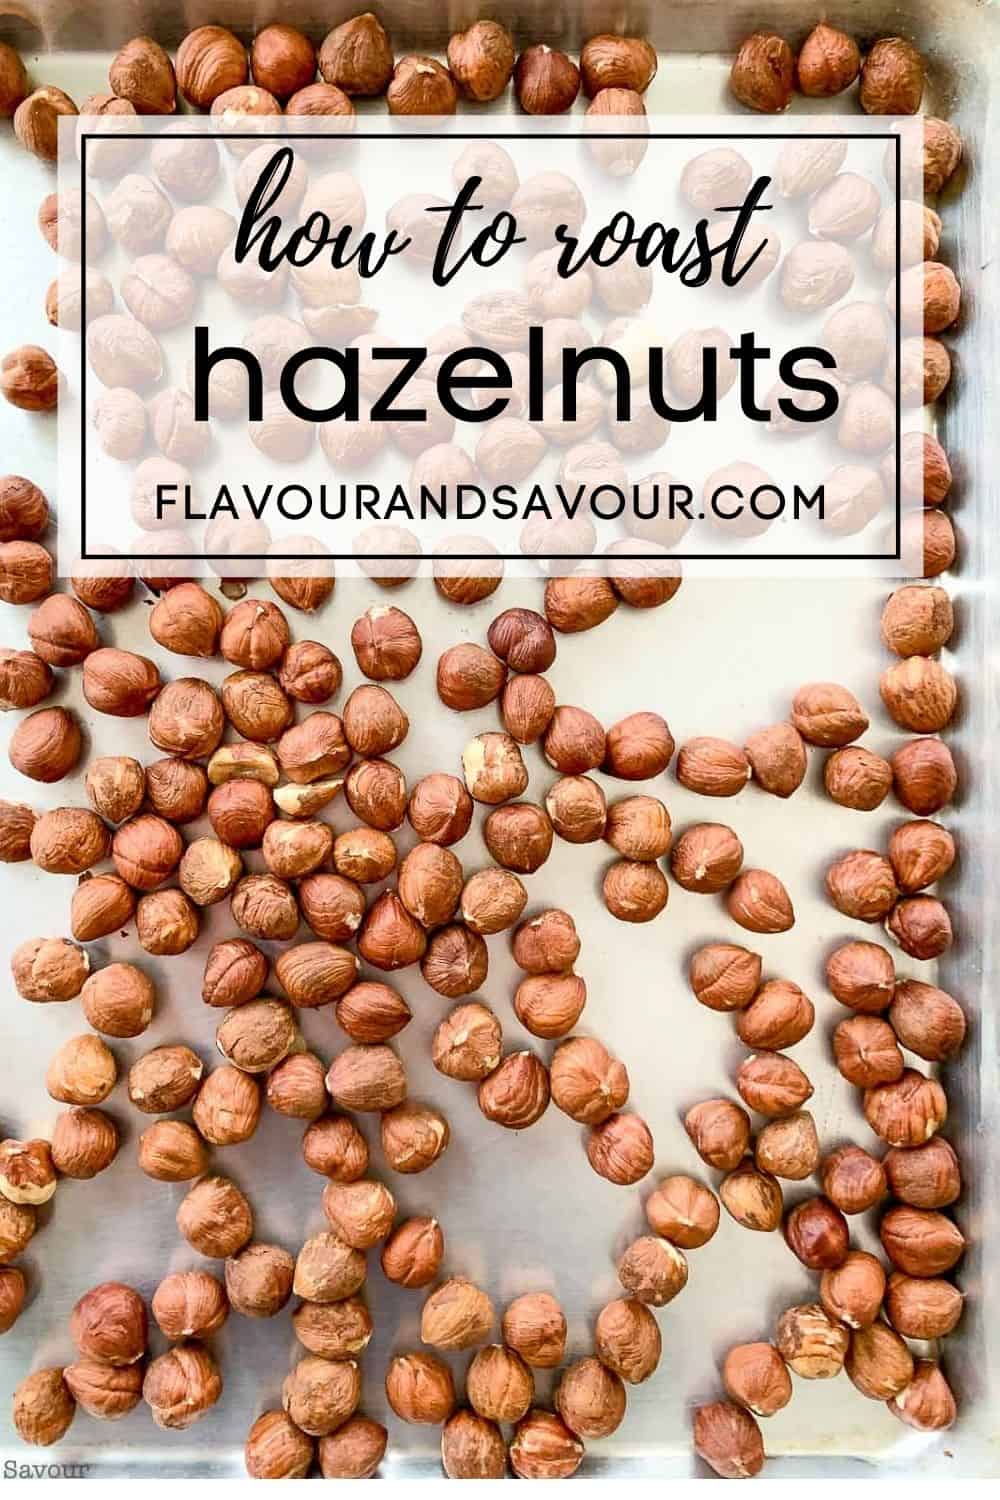 How To Roast And Skin Hazelnuts Flavour And Savour